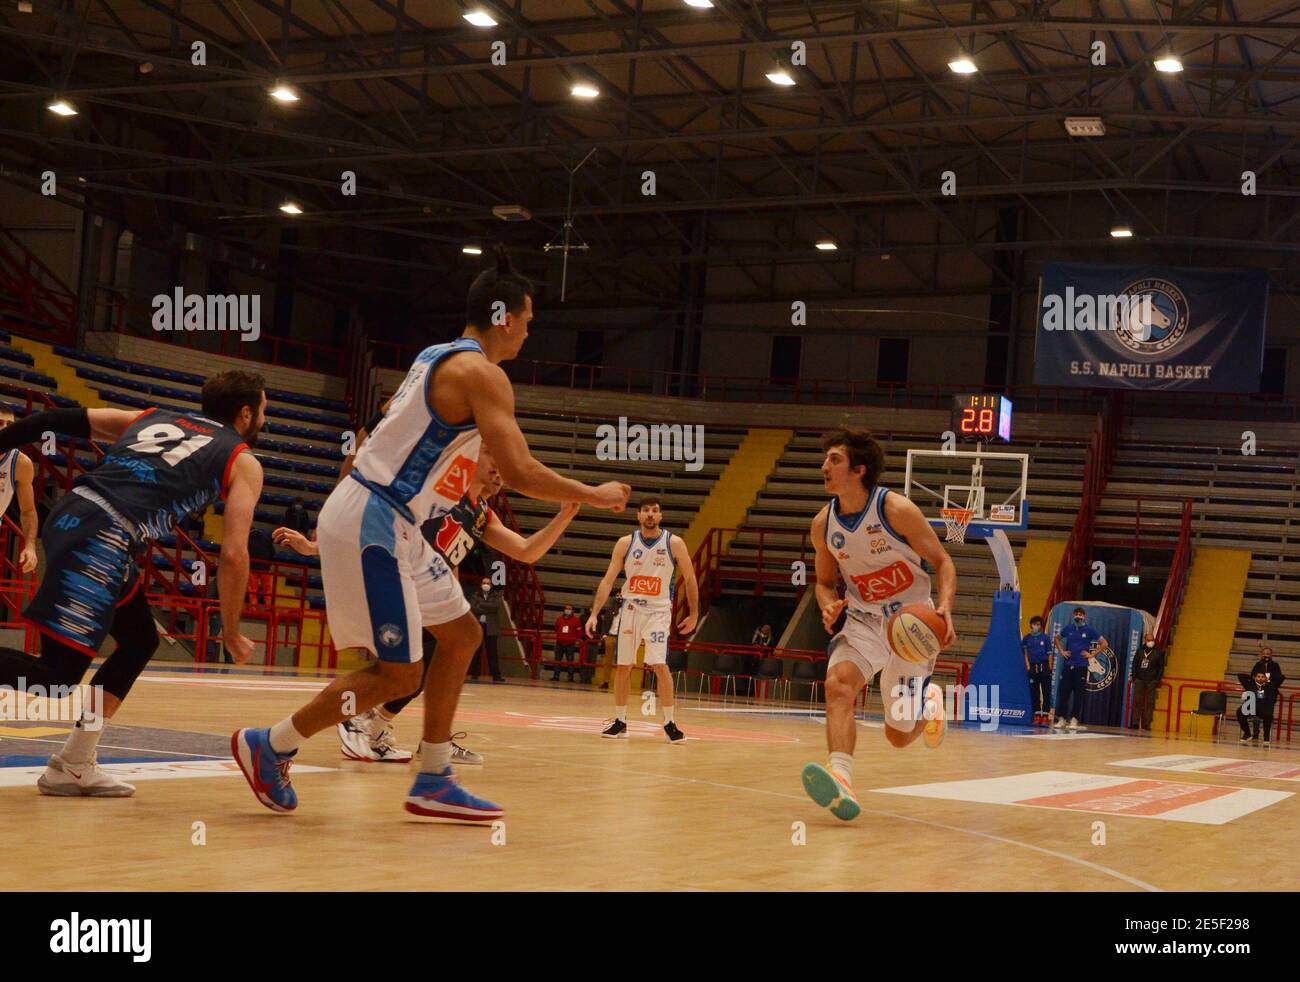 Naples, Italy. 27th Jan, 2021. Lorenzo Uglietti, player of Napoli Basket  fight for the ball during the match played at Palabarbuto sports hall of  Naples, the Napoli Basket won vs Ferrara in